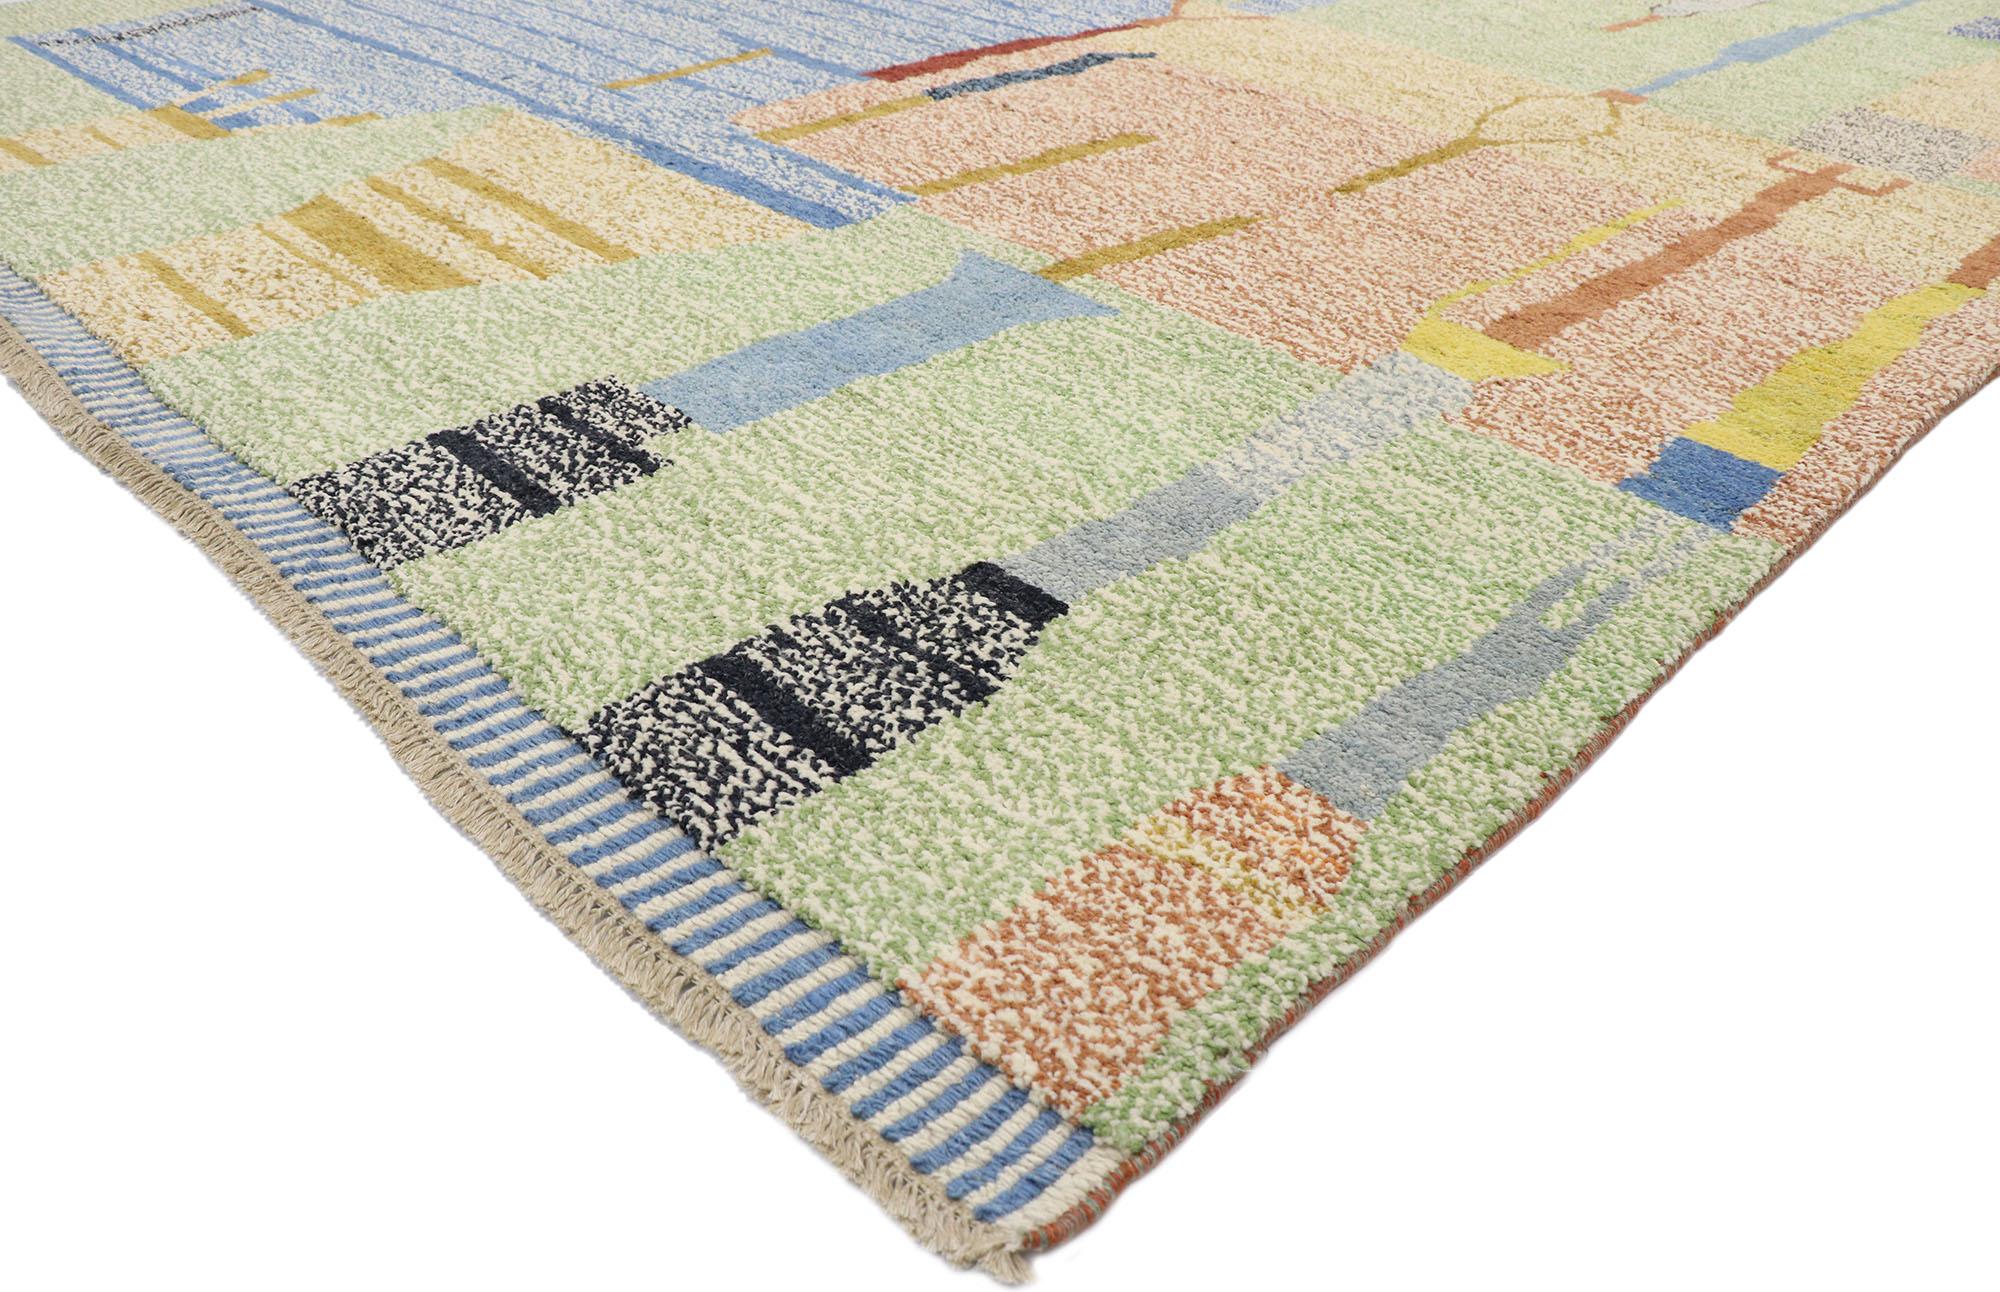 80665, new contemporary Moroccan style rug with Abstract Postmodern Pointillism design. Showcasing a bold expressive design, incredible detail and texture, this hand knotted wool contemporary Moroccan style rug is a captivating vision of woven